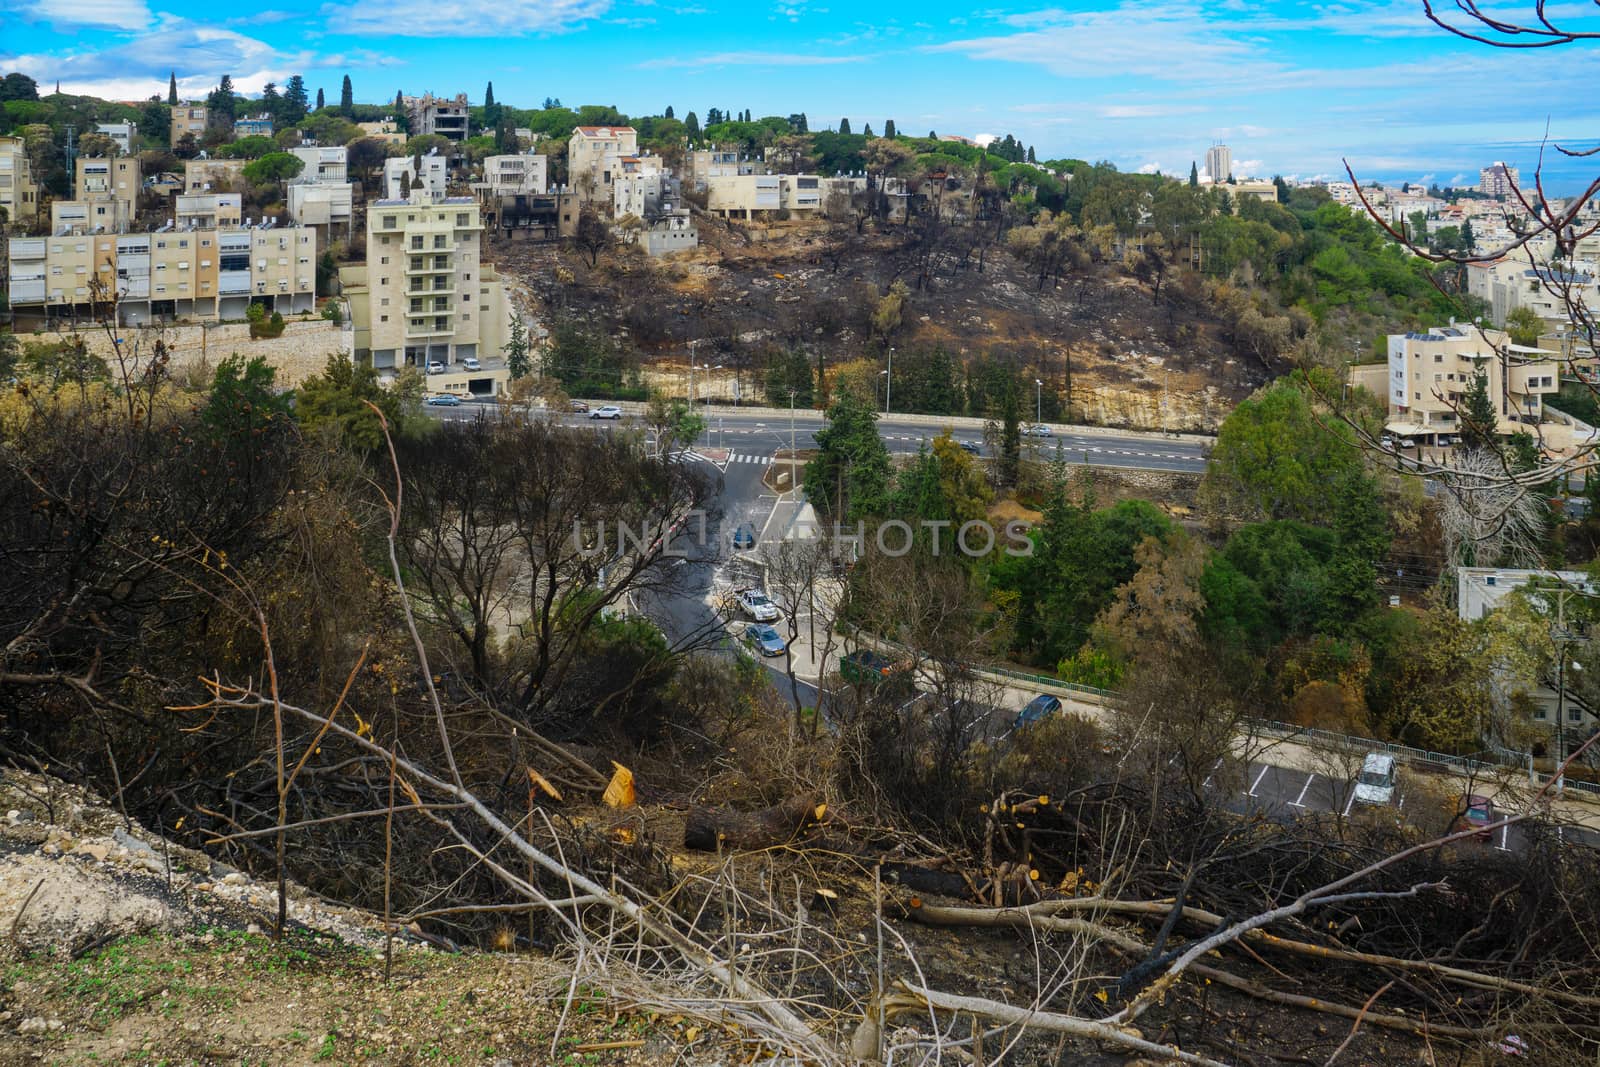 HAIFA, ISRAEL - DECEMBER 08, 2016: View of the results of the fire of November 24, with burn down trees and houses, in Haifa, Israel